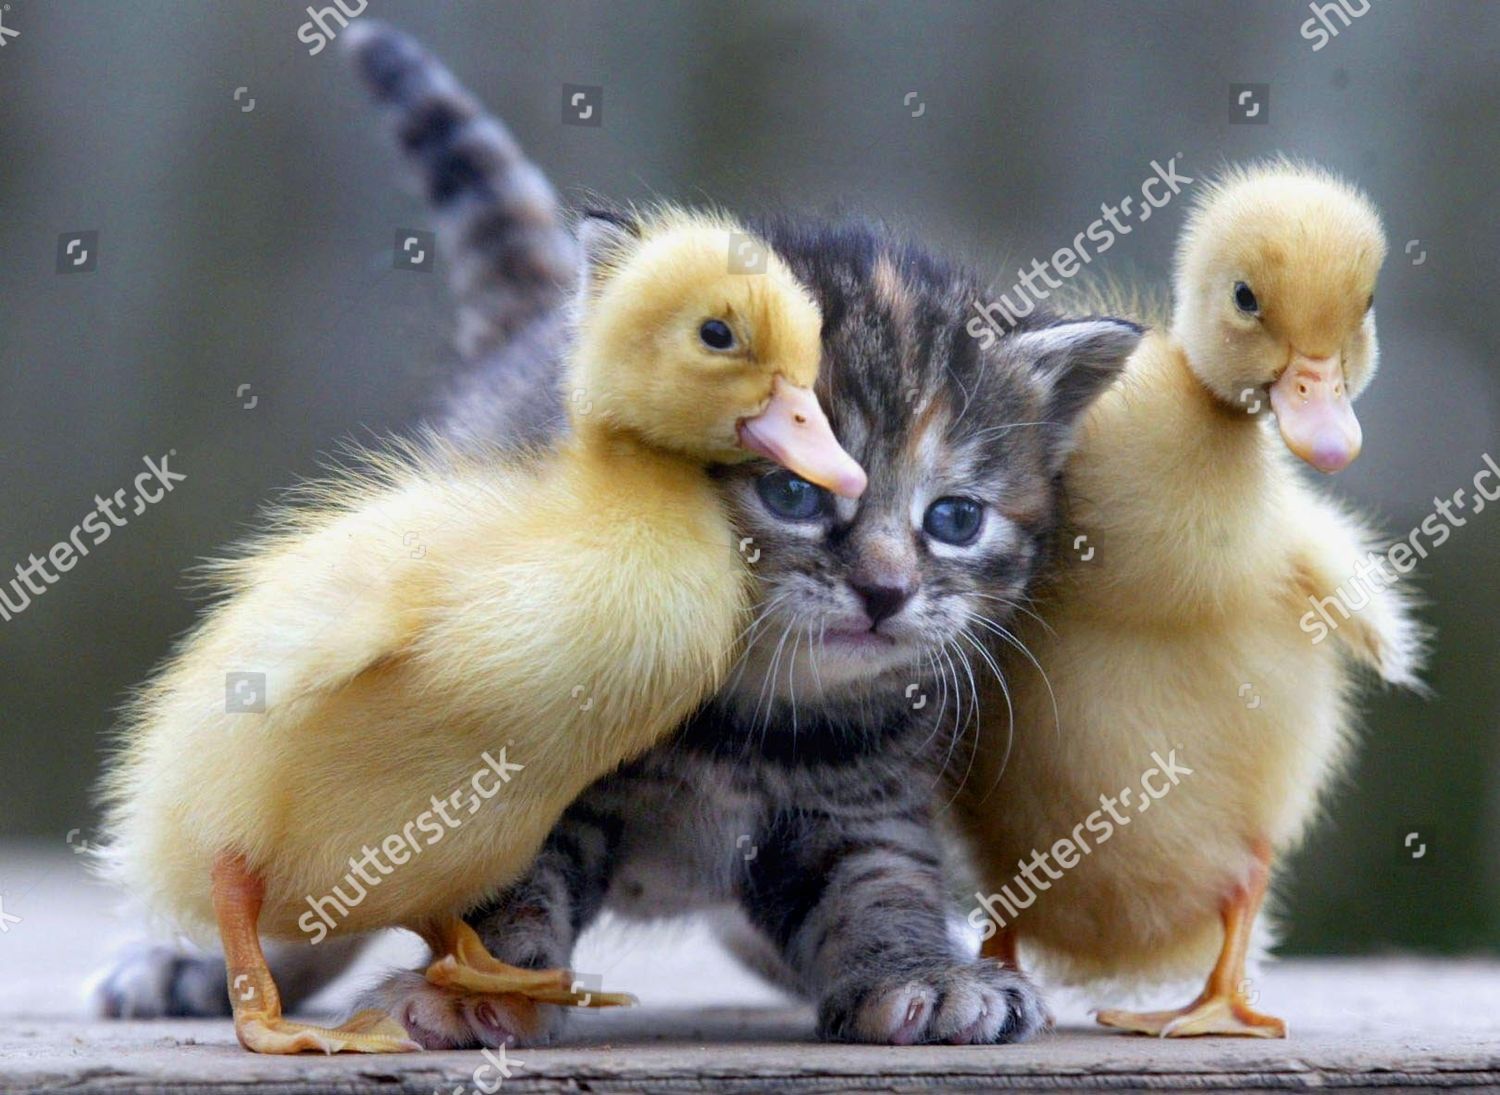 baby ducklings and kittens